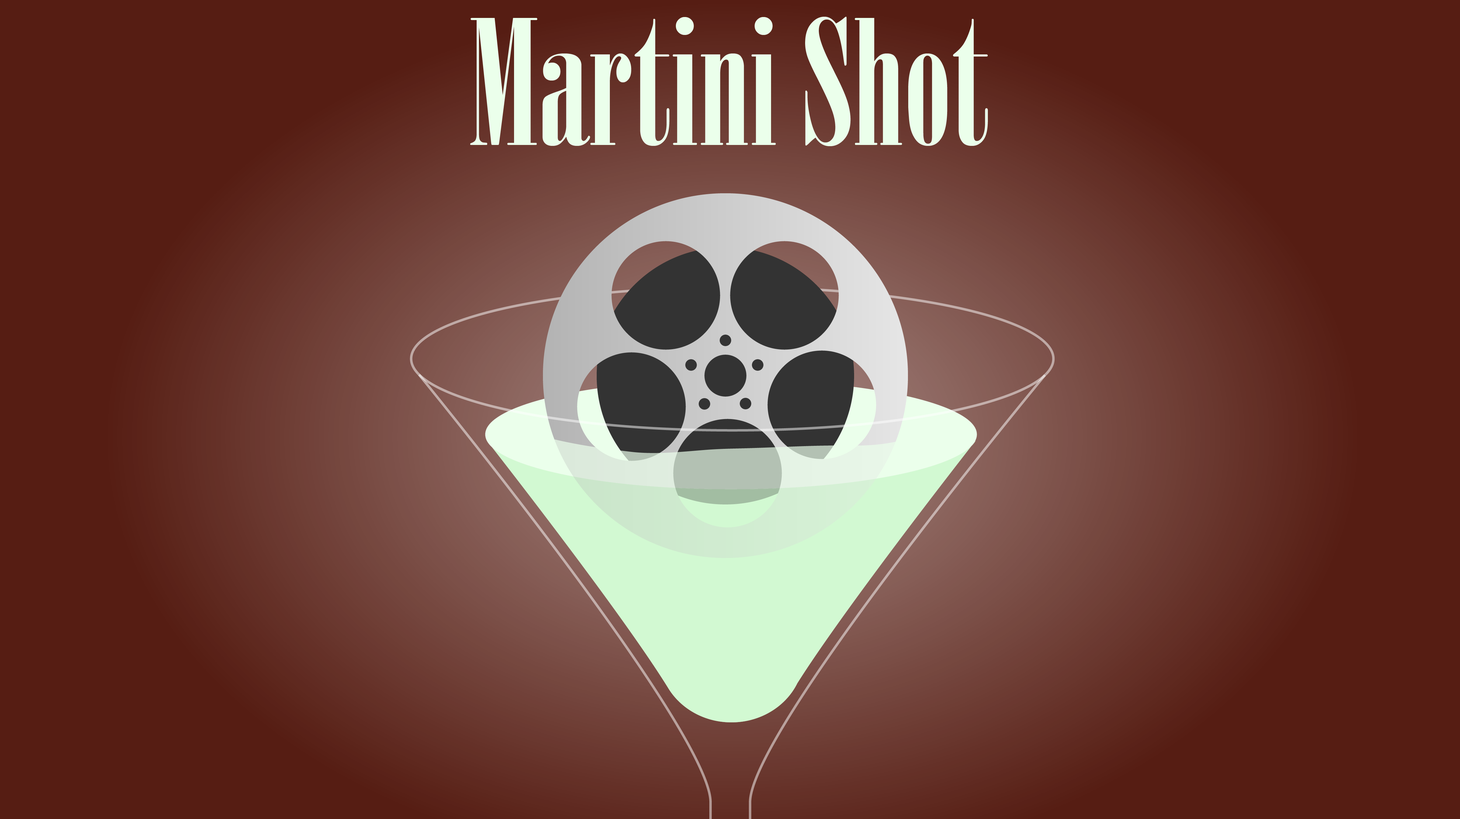 This is Rob Long, and on today’s Martini Shot I tell the story of two actors up for the same part who interpreted the character very differently, and what happened after that. Spoiler alert: they both got the job. Which almost never happens.